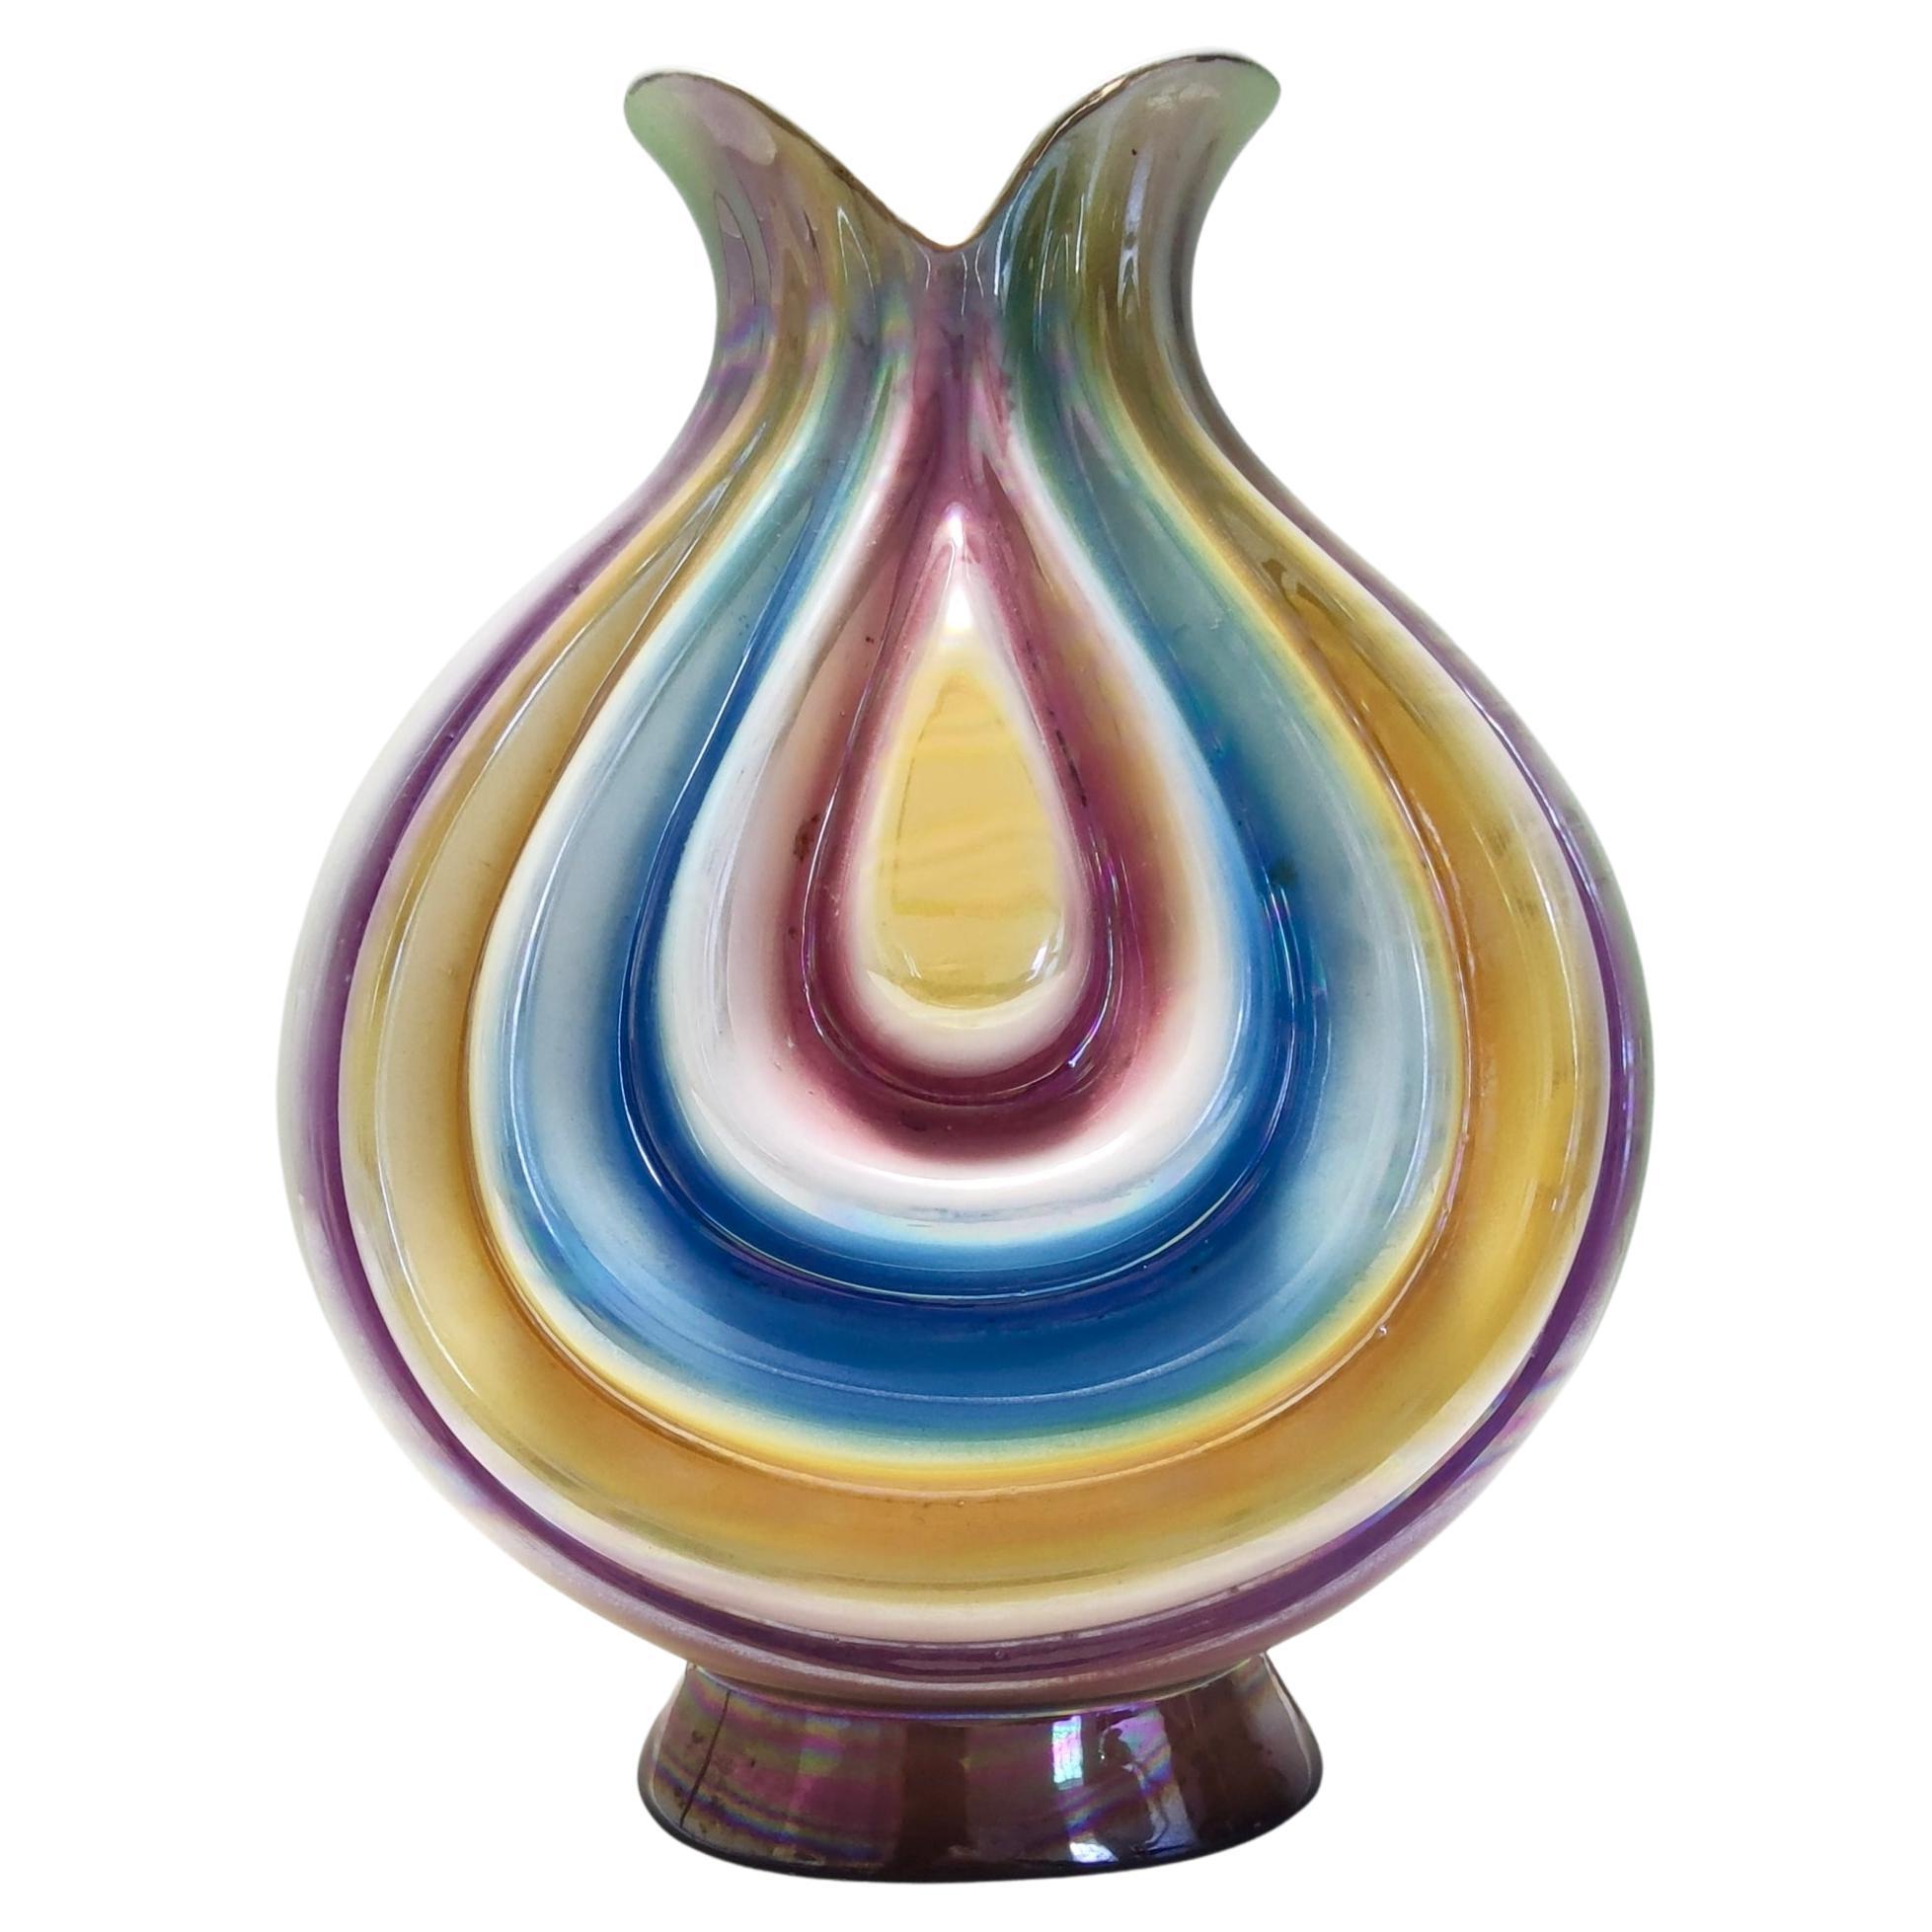 Vintage Ceramic Vase Attributed to Italo Casini with Iridescent Colors, Italy For Sale